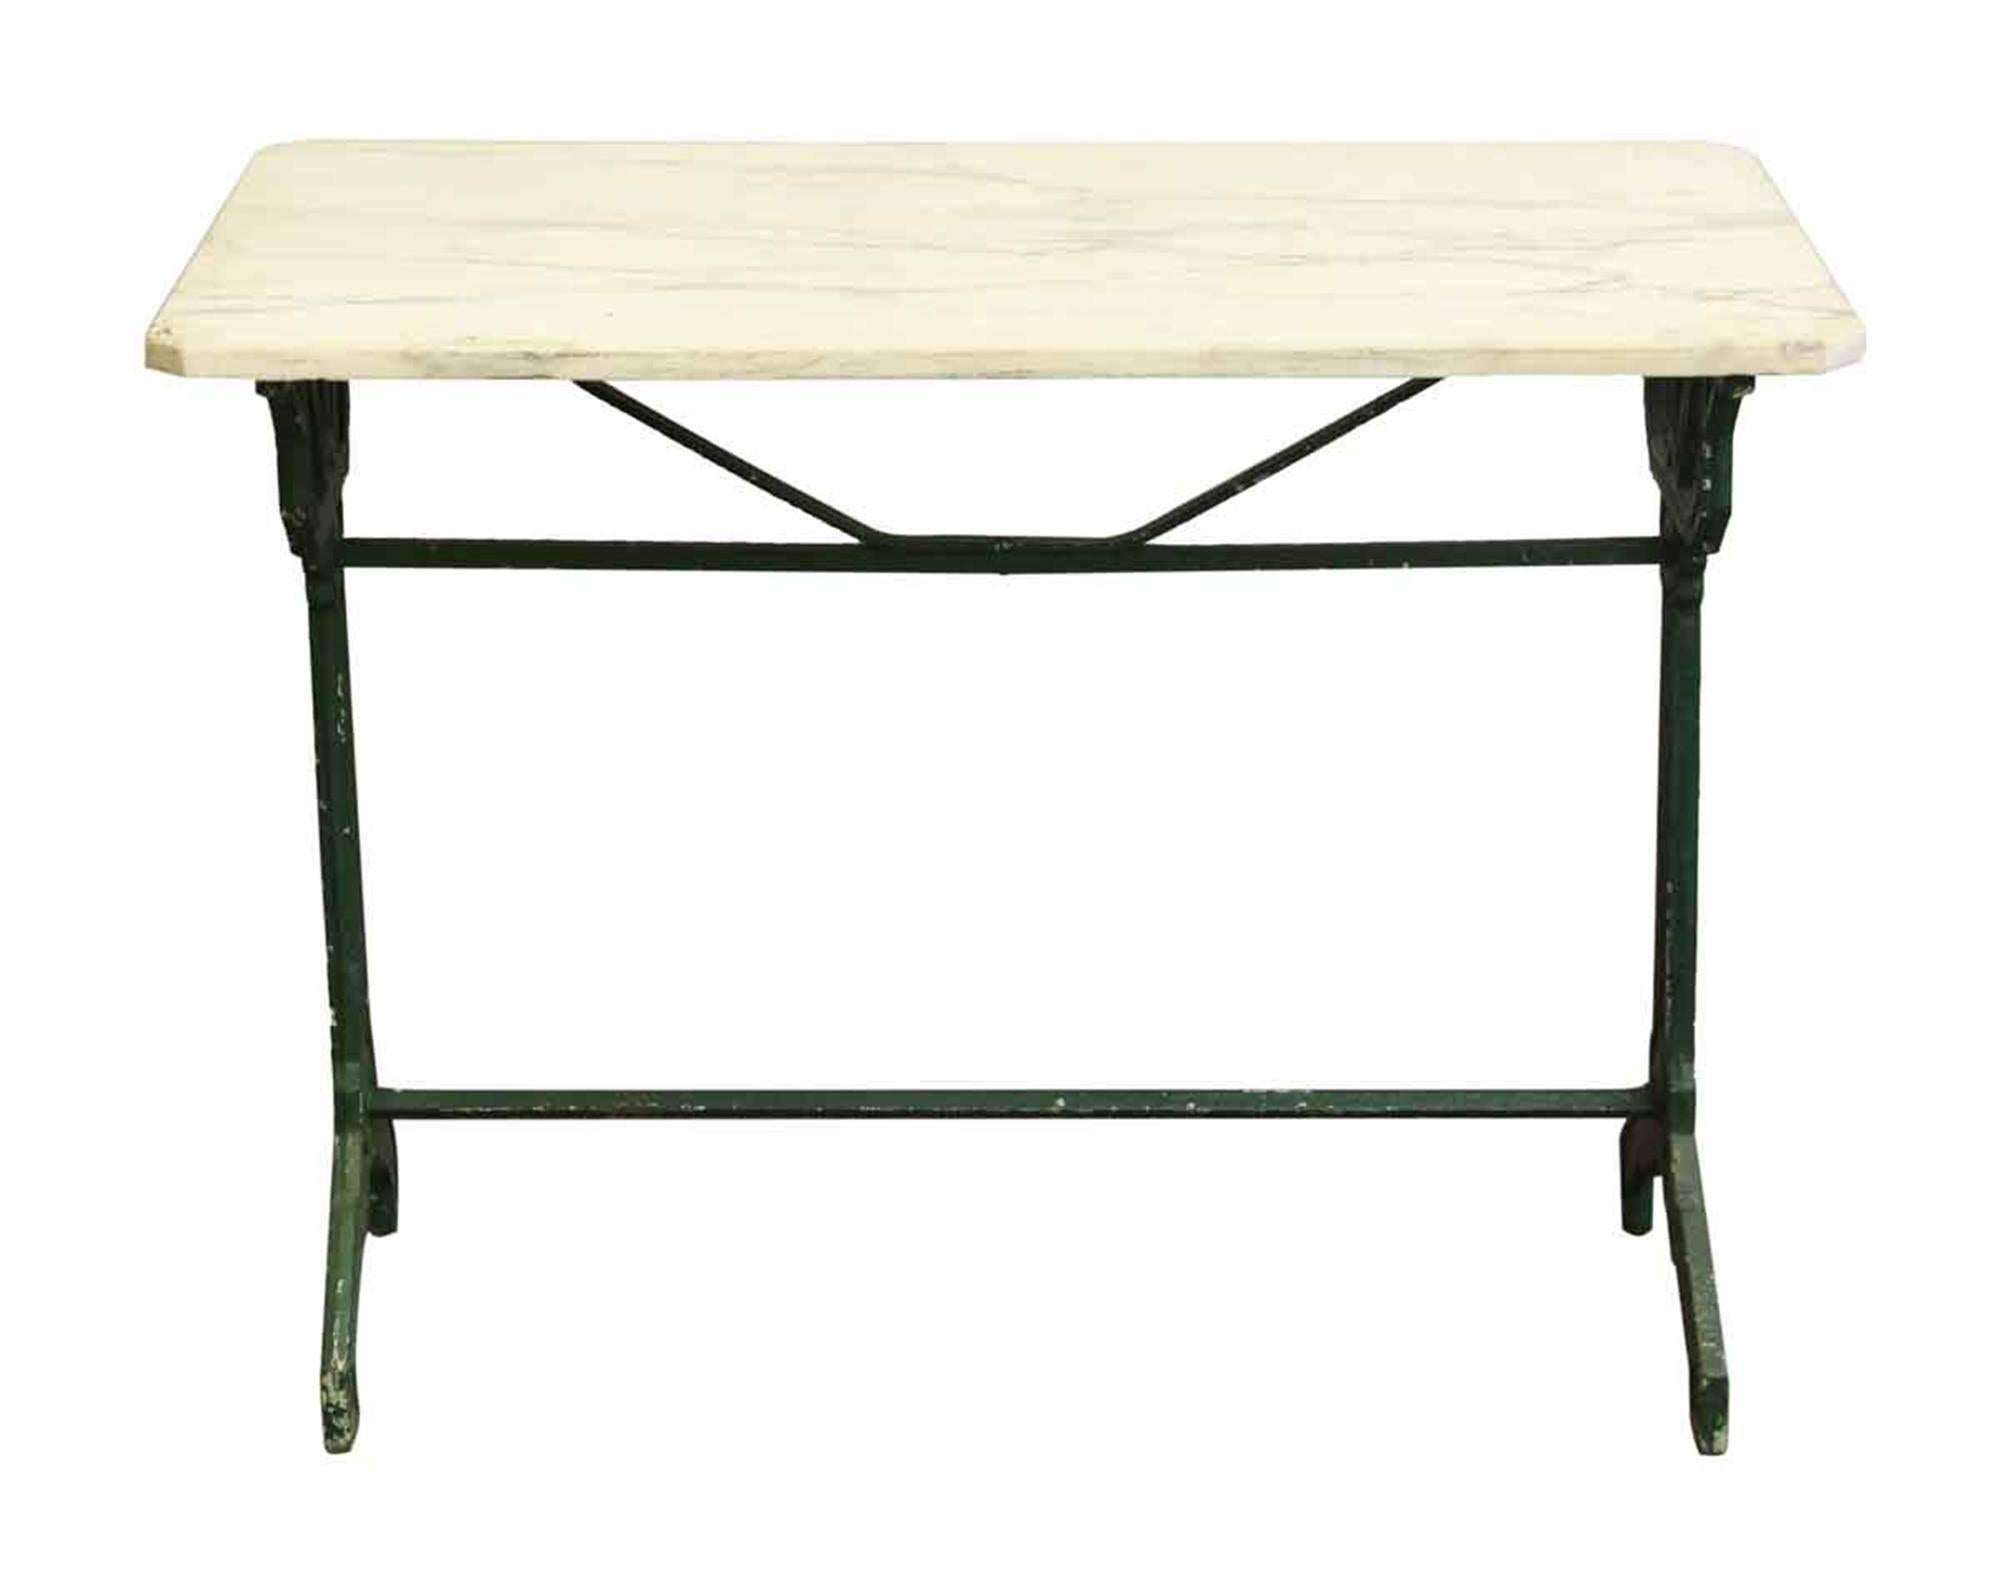 Green cast iron base table with a white veined marble top. The legs are inscribed Meubles Le Lion. This can be seen at our 302, Bowery location in Manhattan.